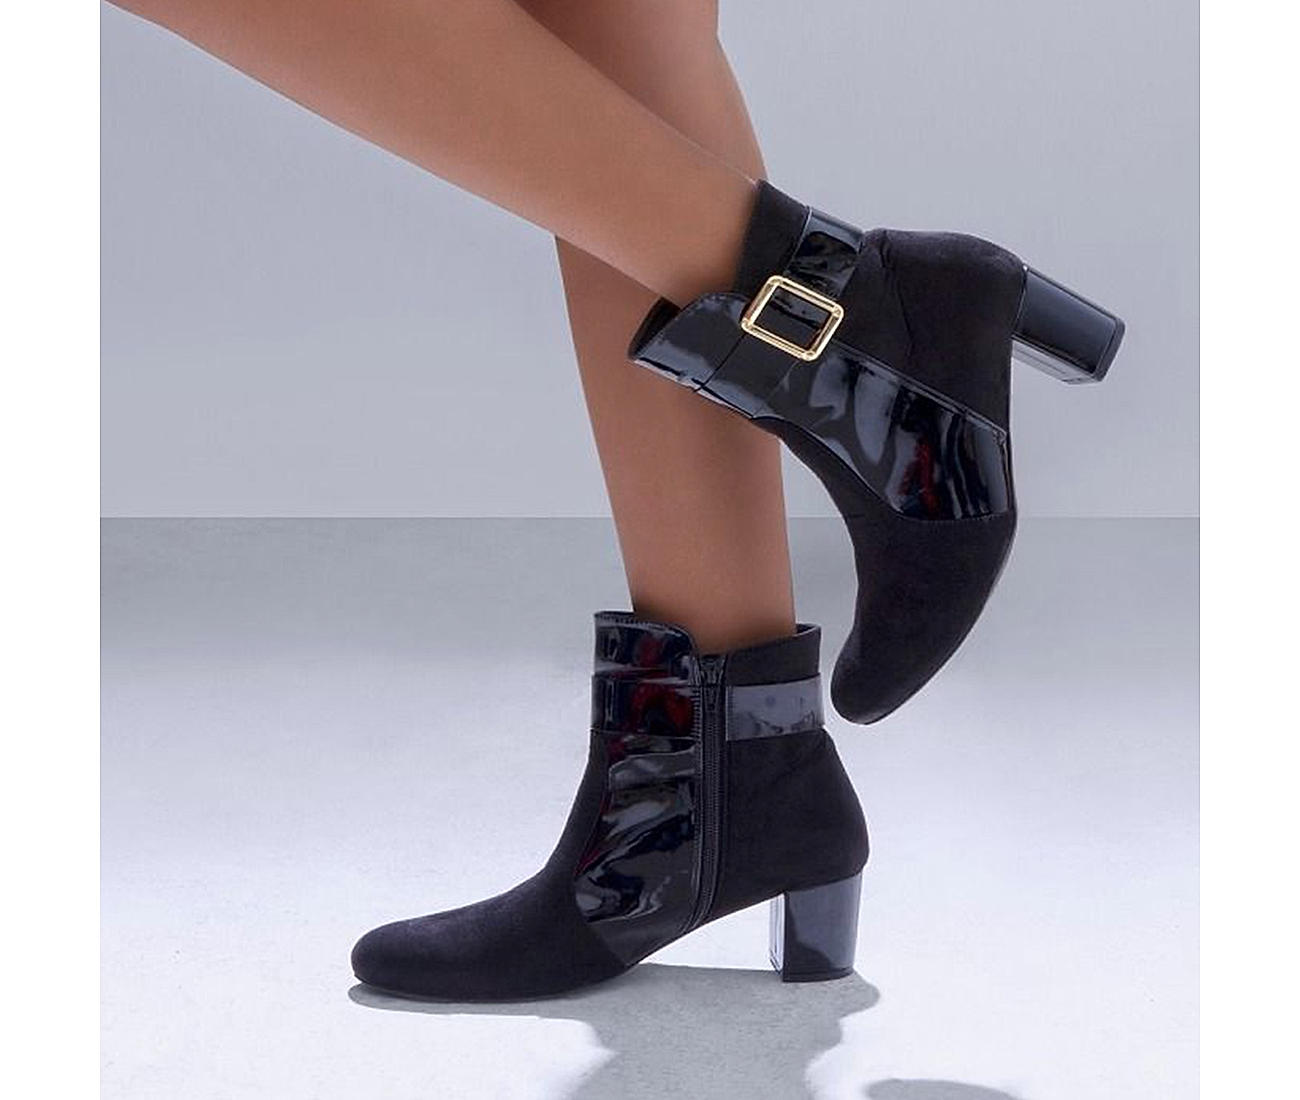 Black Ankle High Boots – Walk Tall